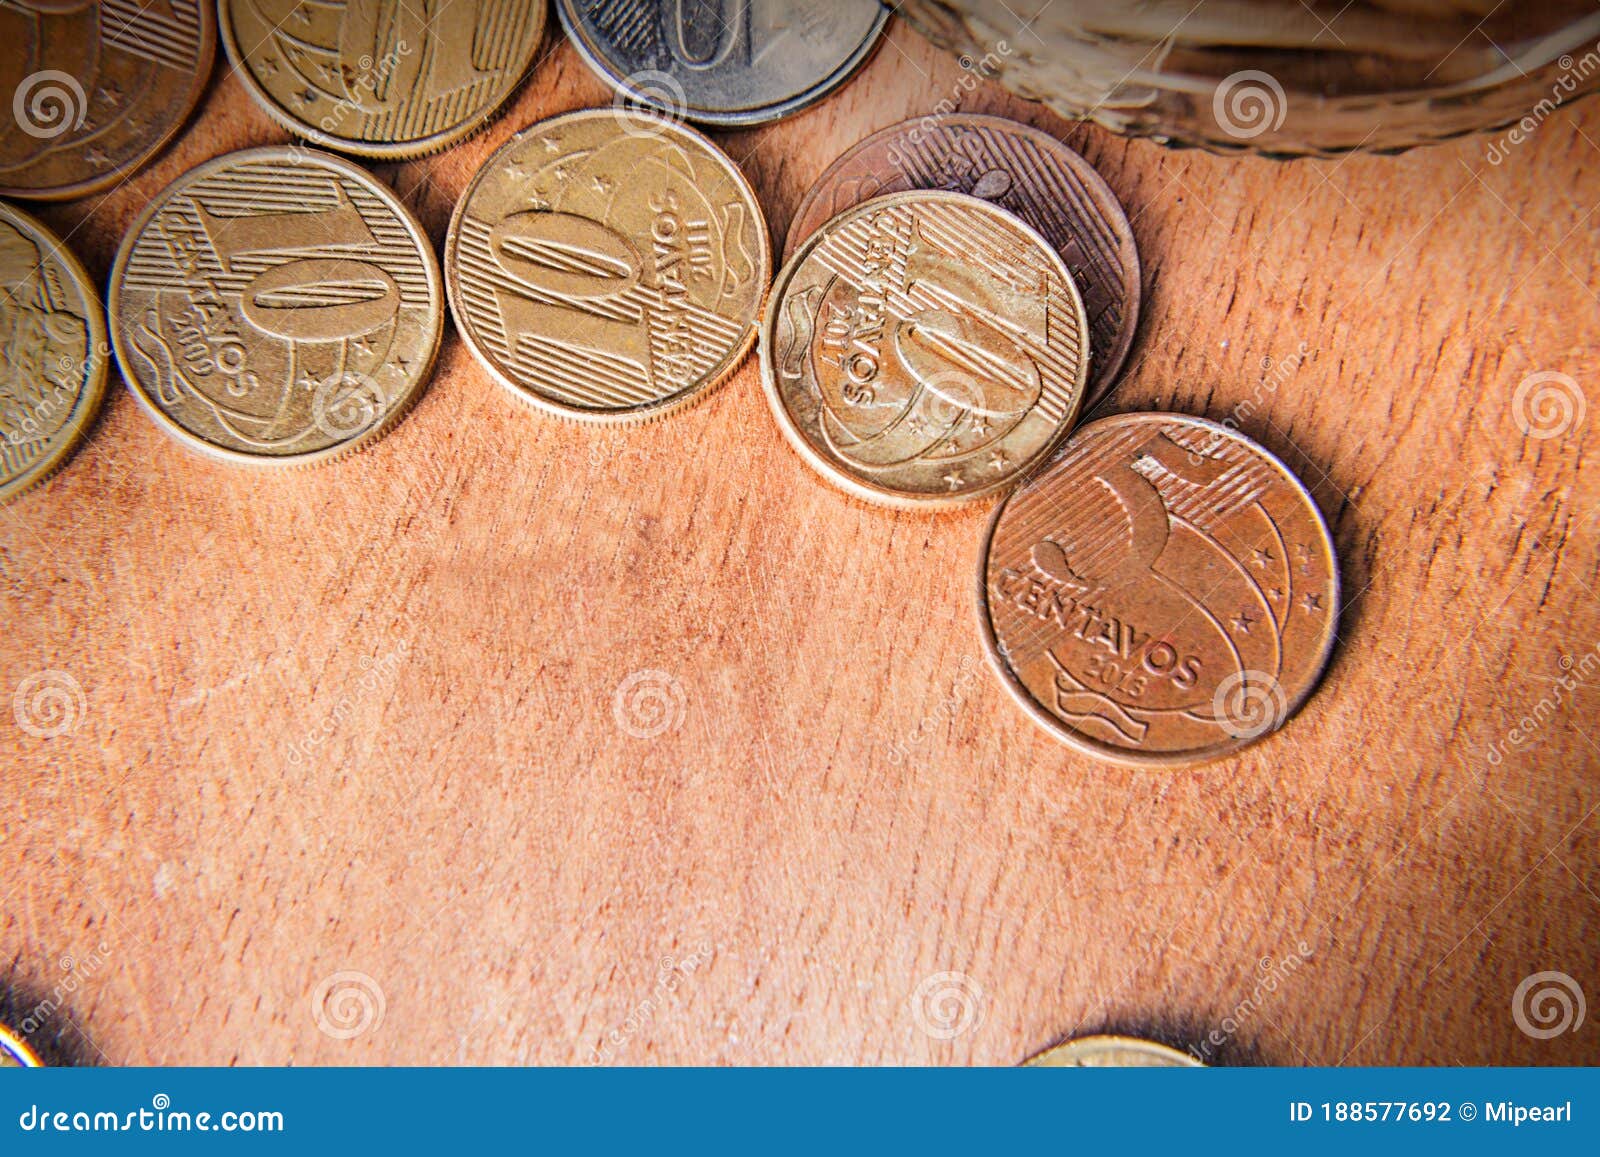 coins and banknotes on the wood table